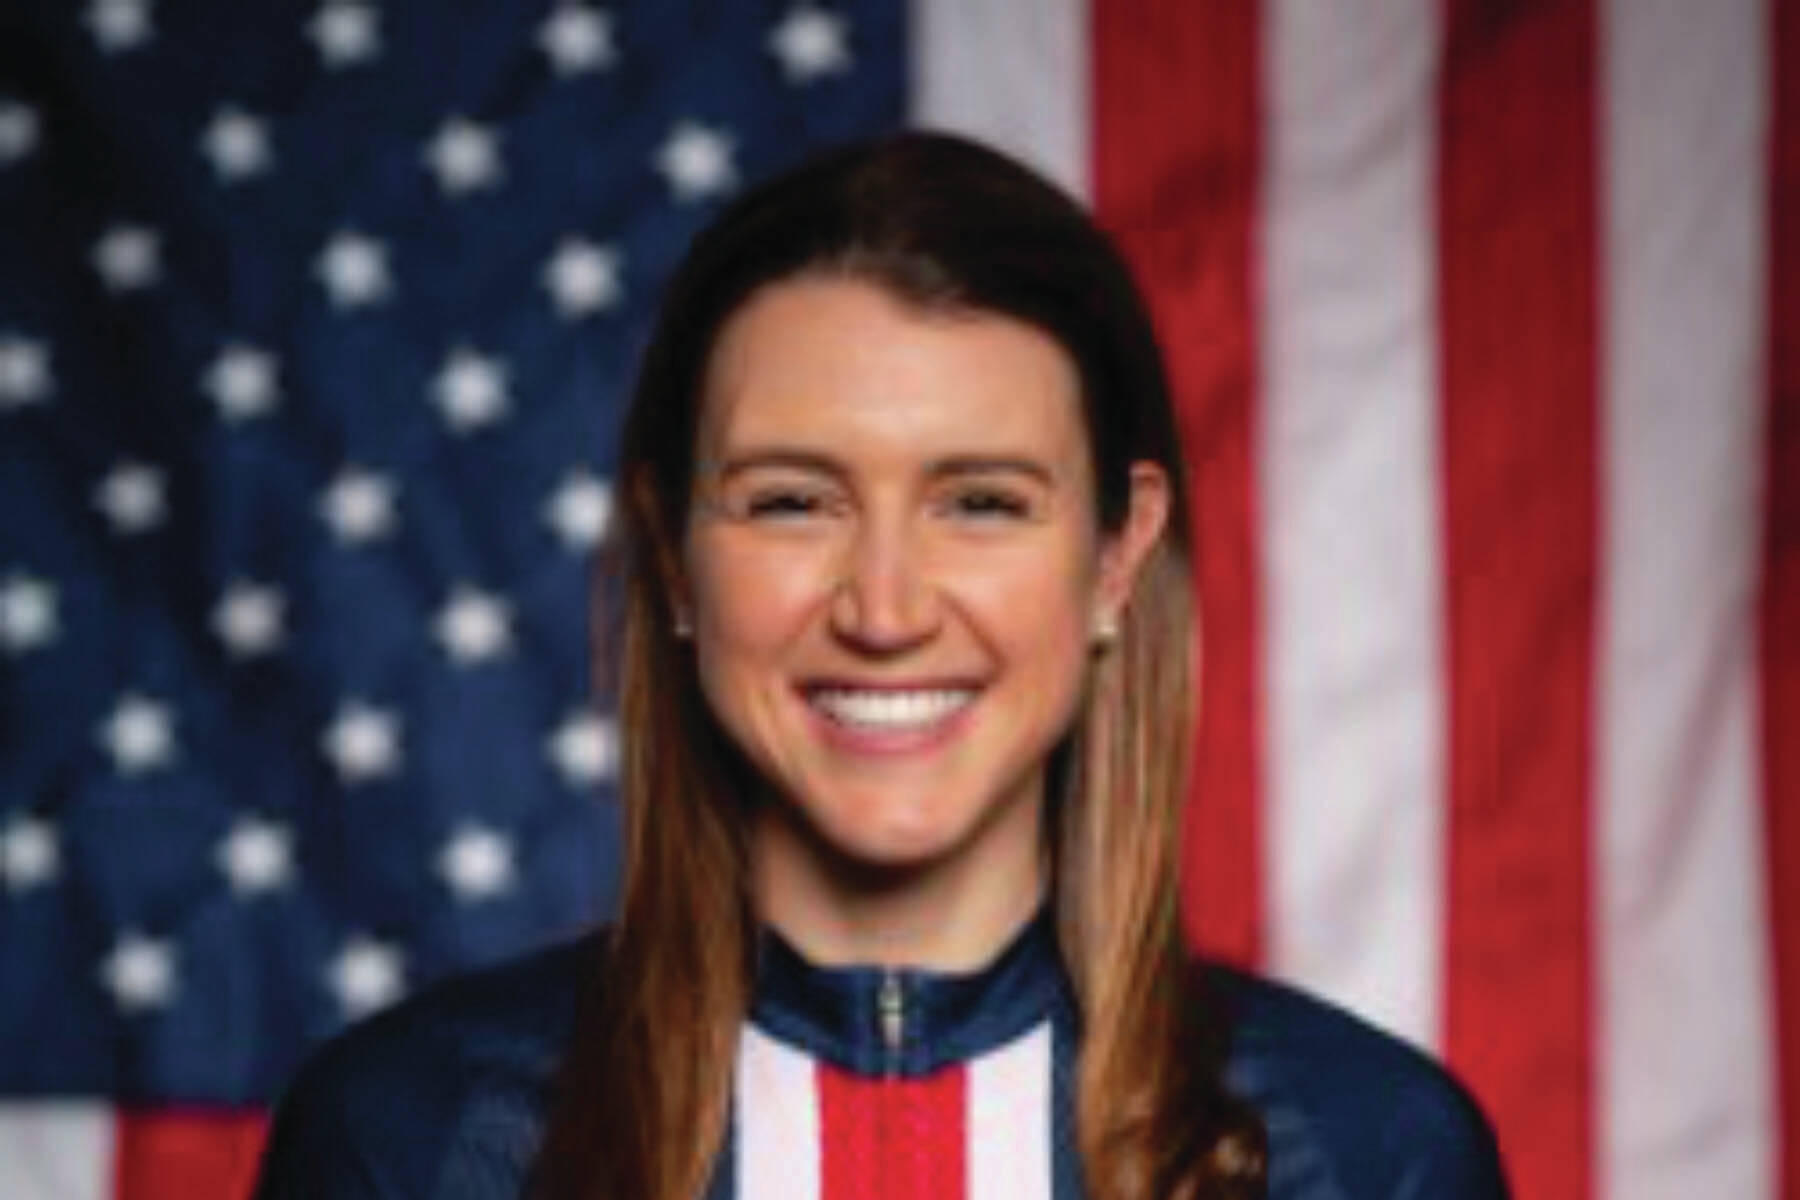 Kristen Faulkner is pictured in her official Olympic portrait photo. (Photo by Evan Kay with Climb High Productions, provided by Kristen Faulkner)